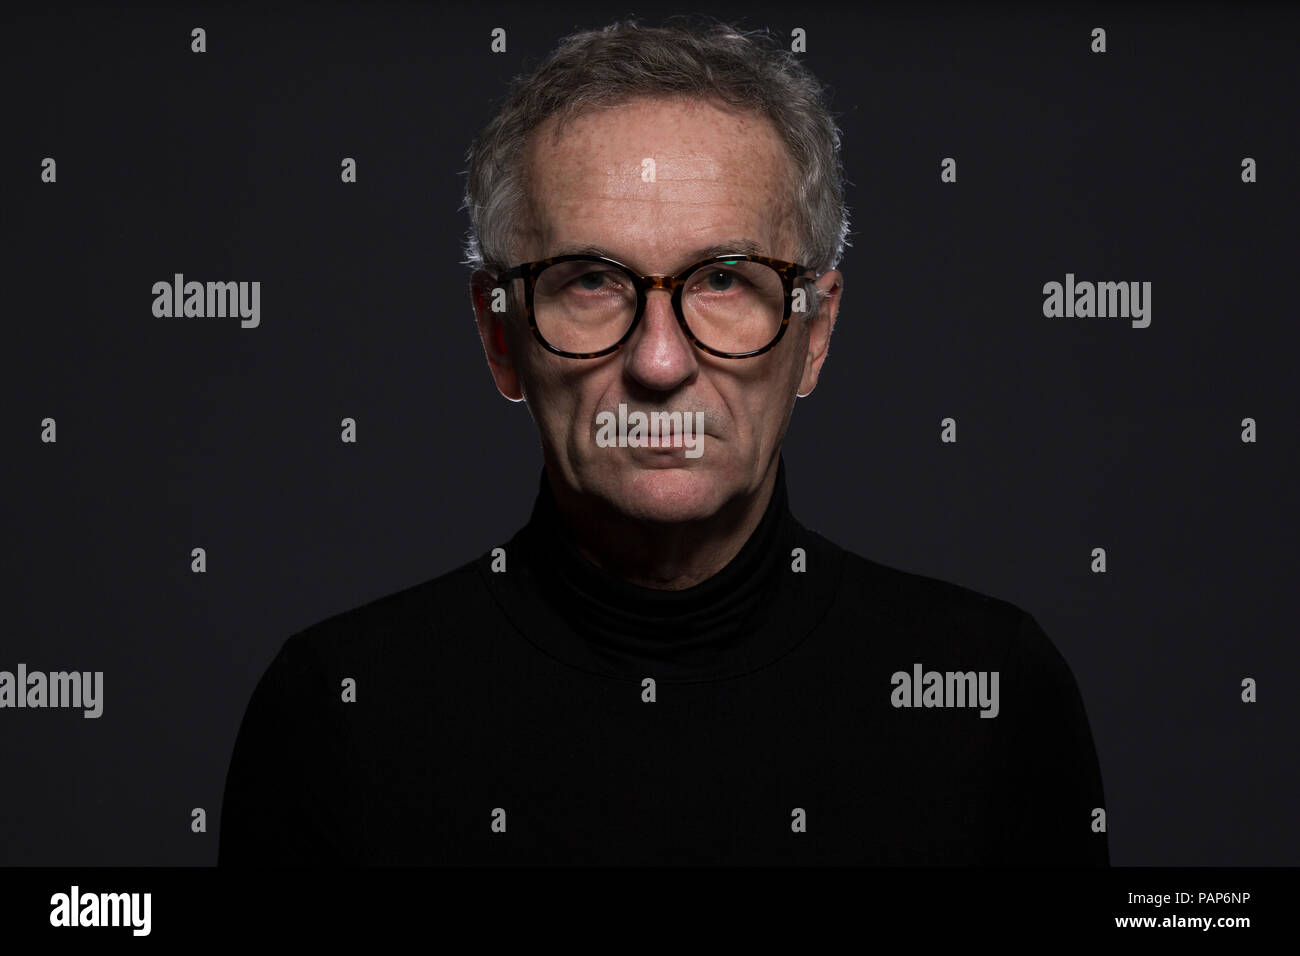 Portrait of serious senior man wearing glasses in front of dark background Stock Photo